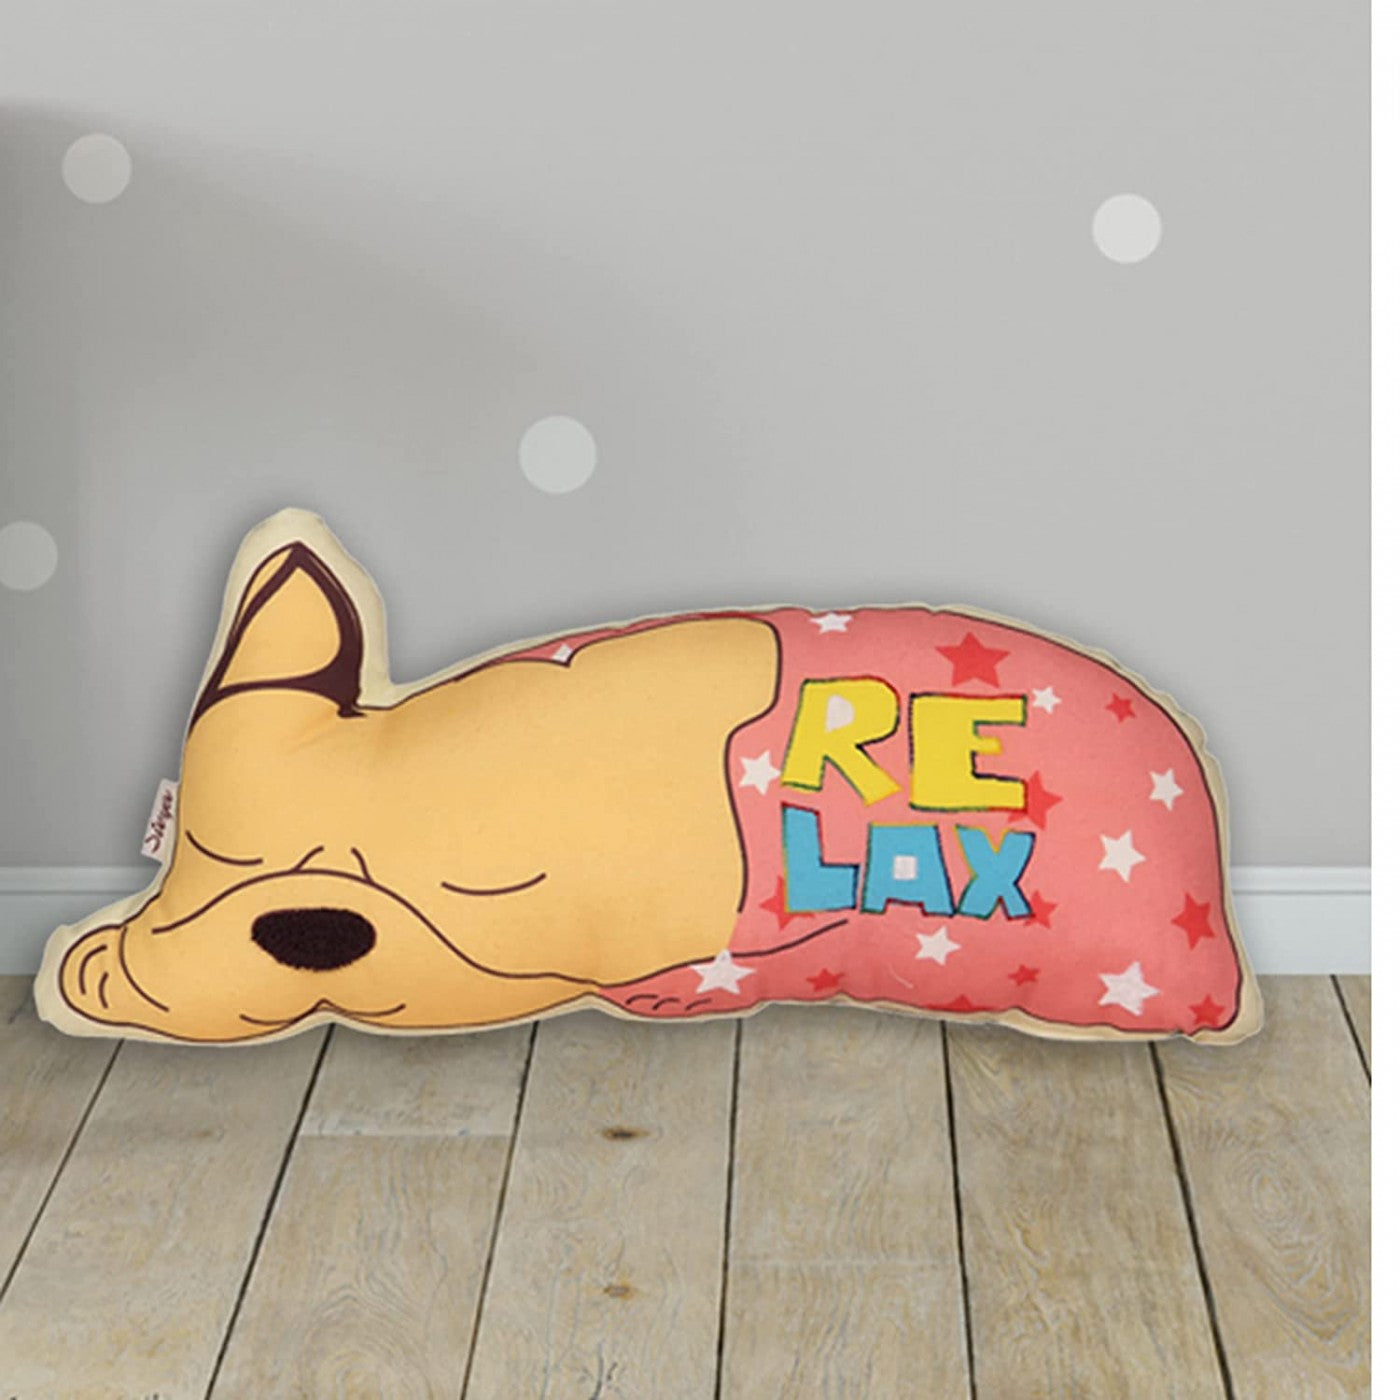 Duckling Dreams: Printed Ploy Duck Chill Dog Stuffed Cushion for Quirky Comfort